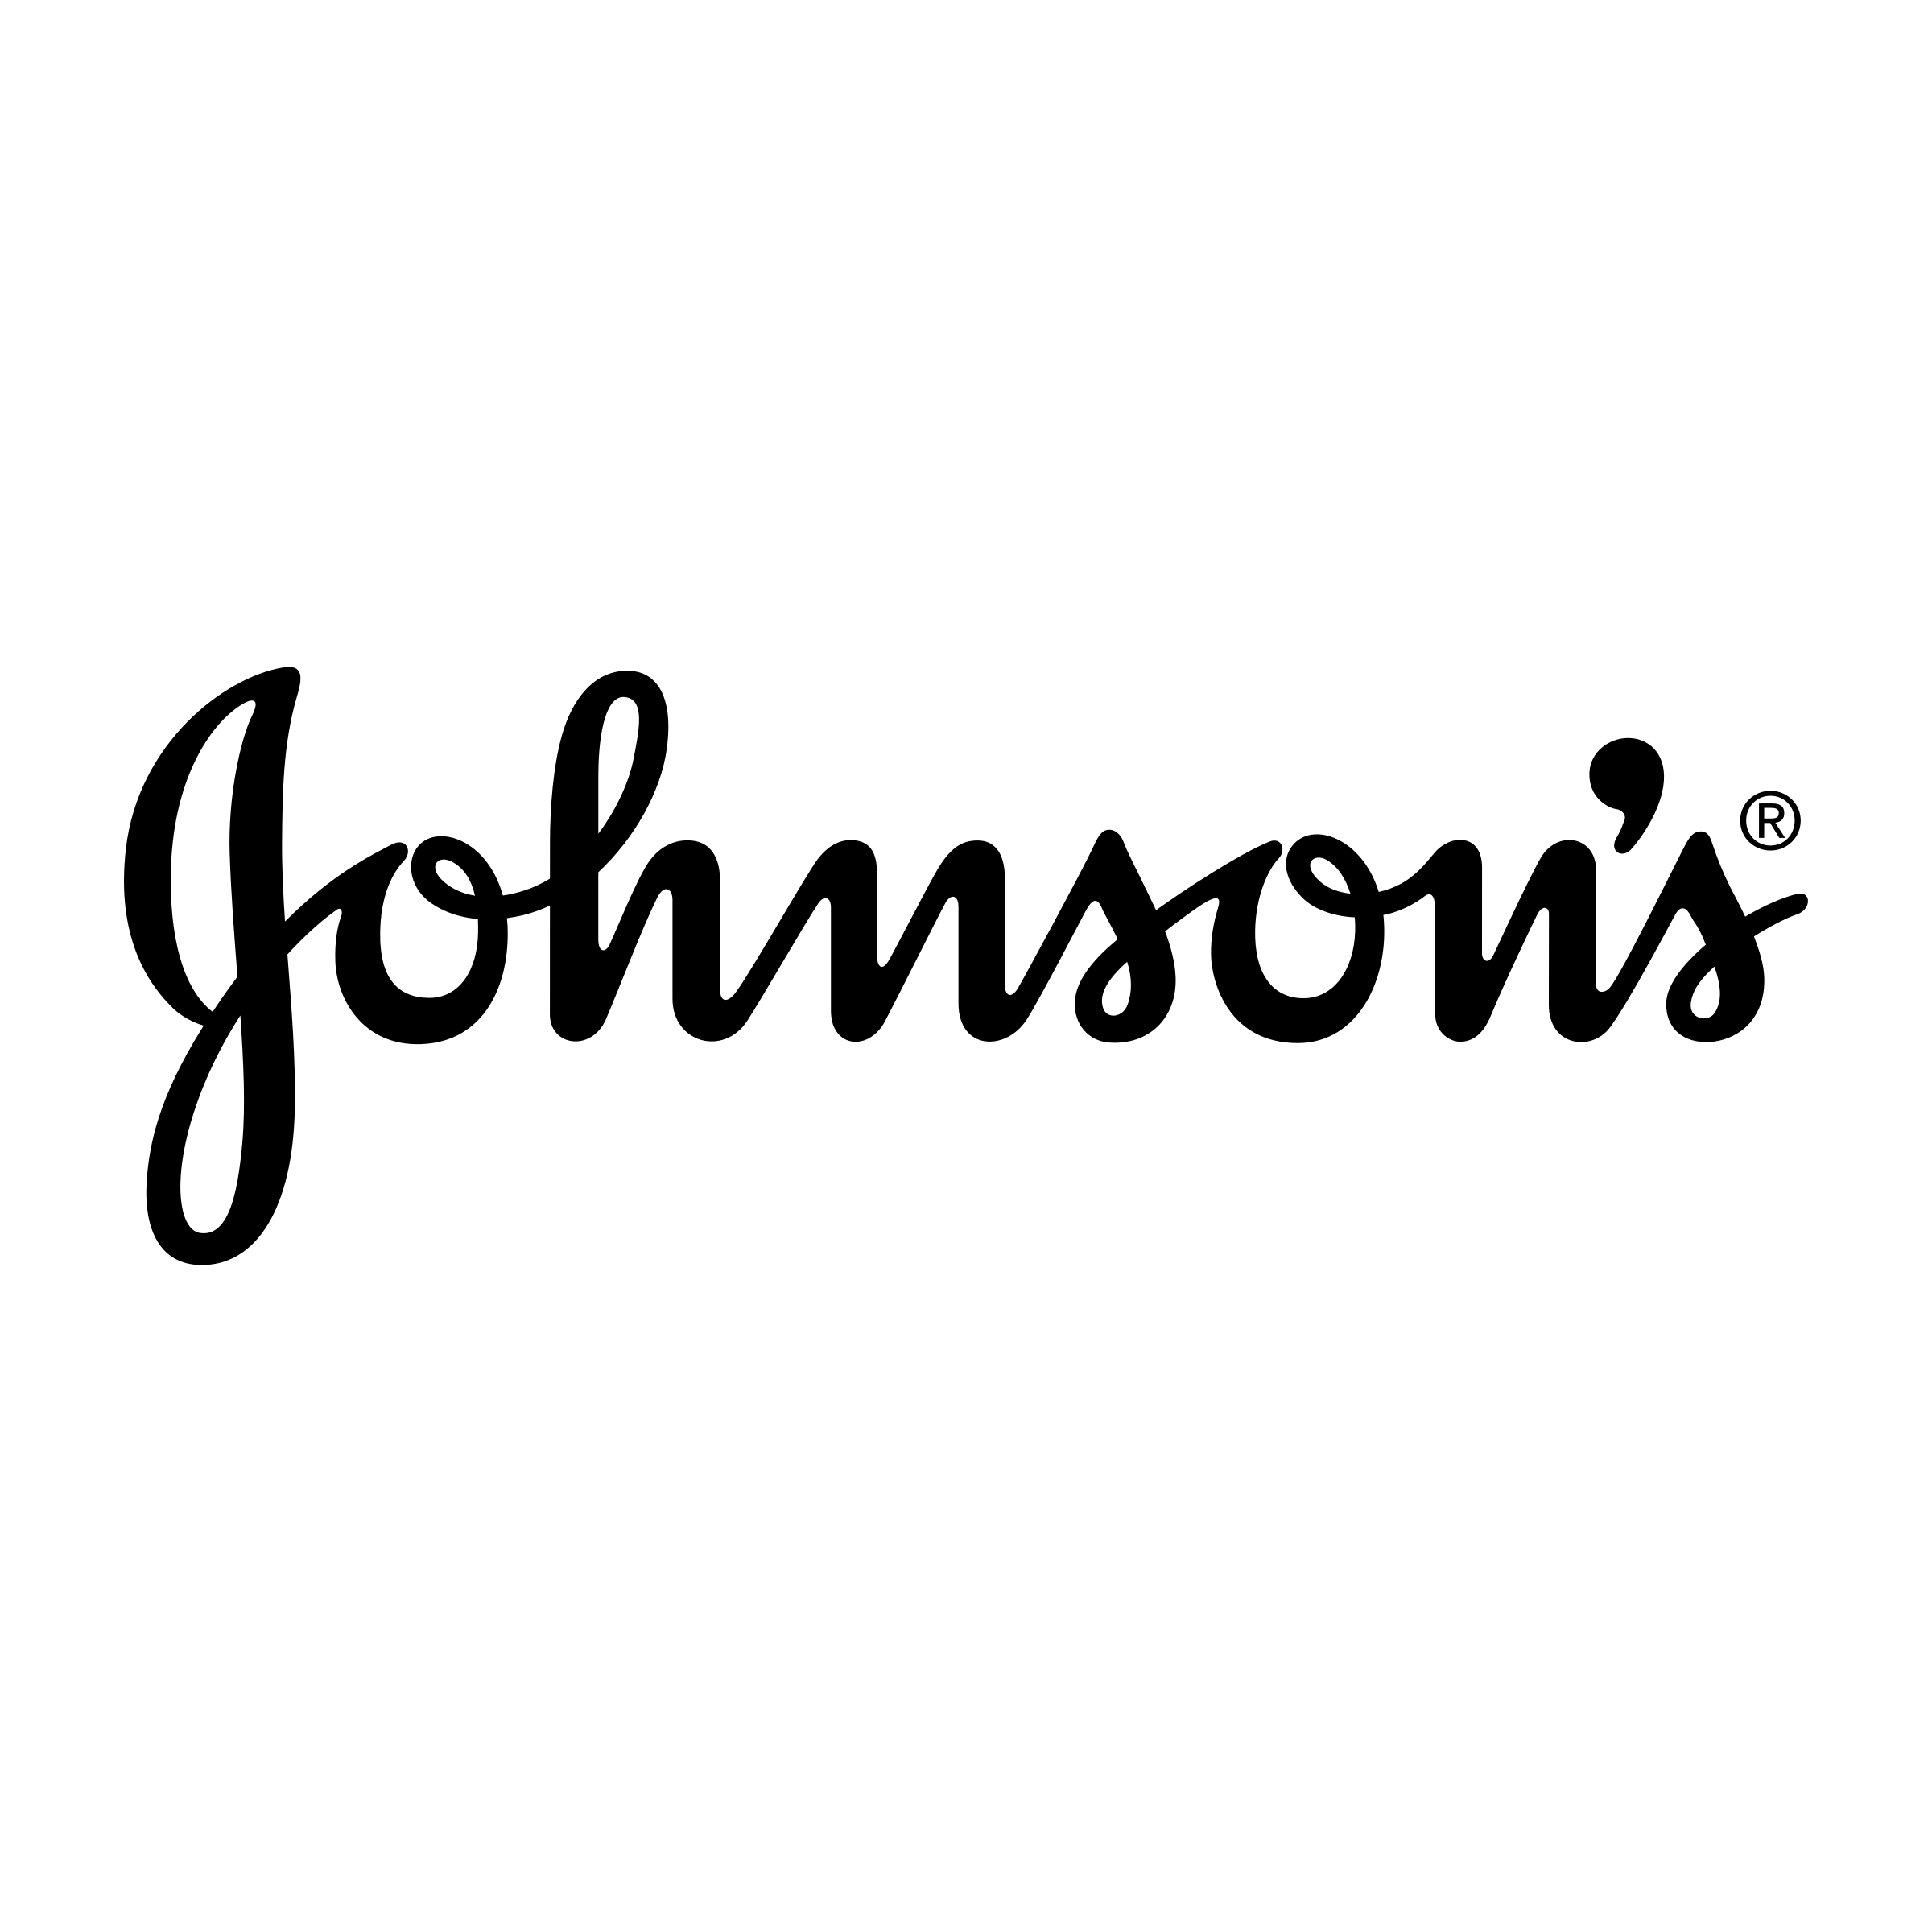 johnsons-logo-black-and-white.png